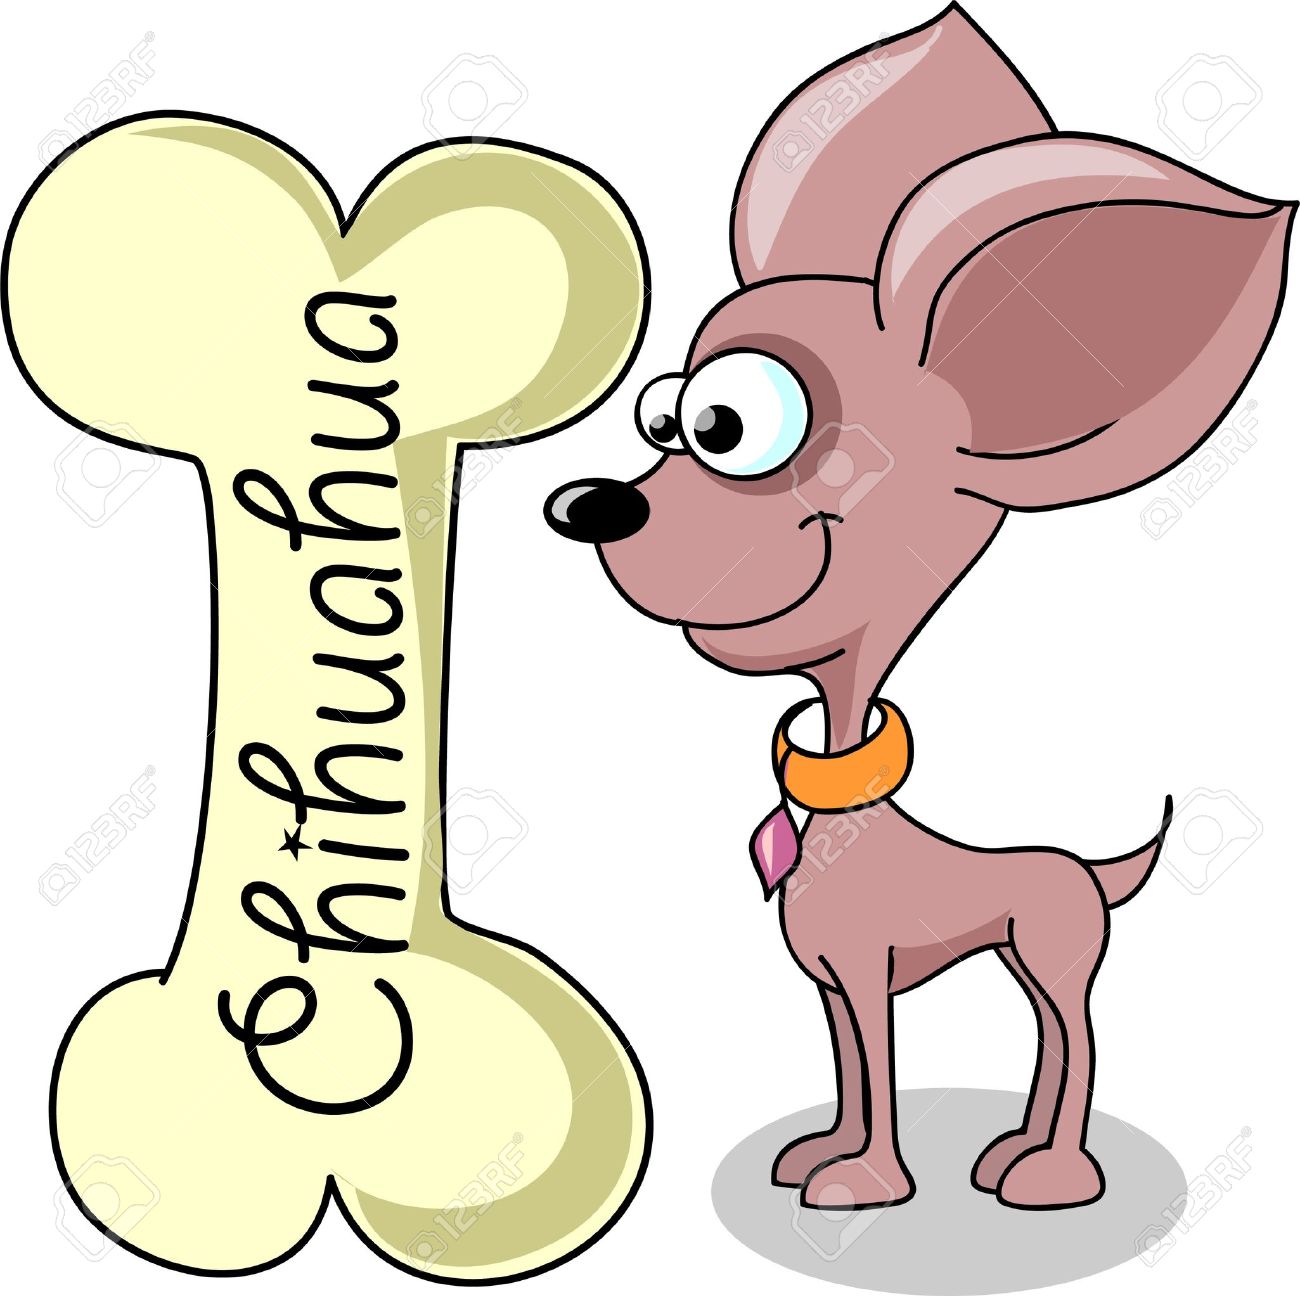 Chihuahua clipart #1, Download drawings